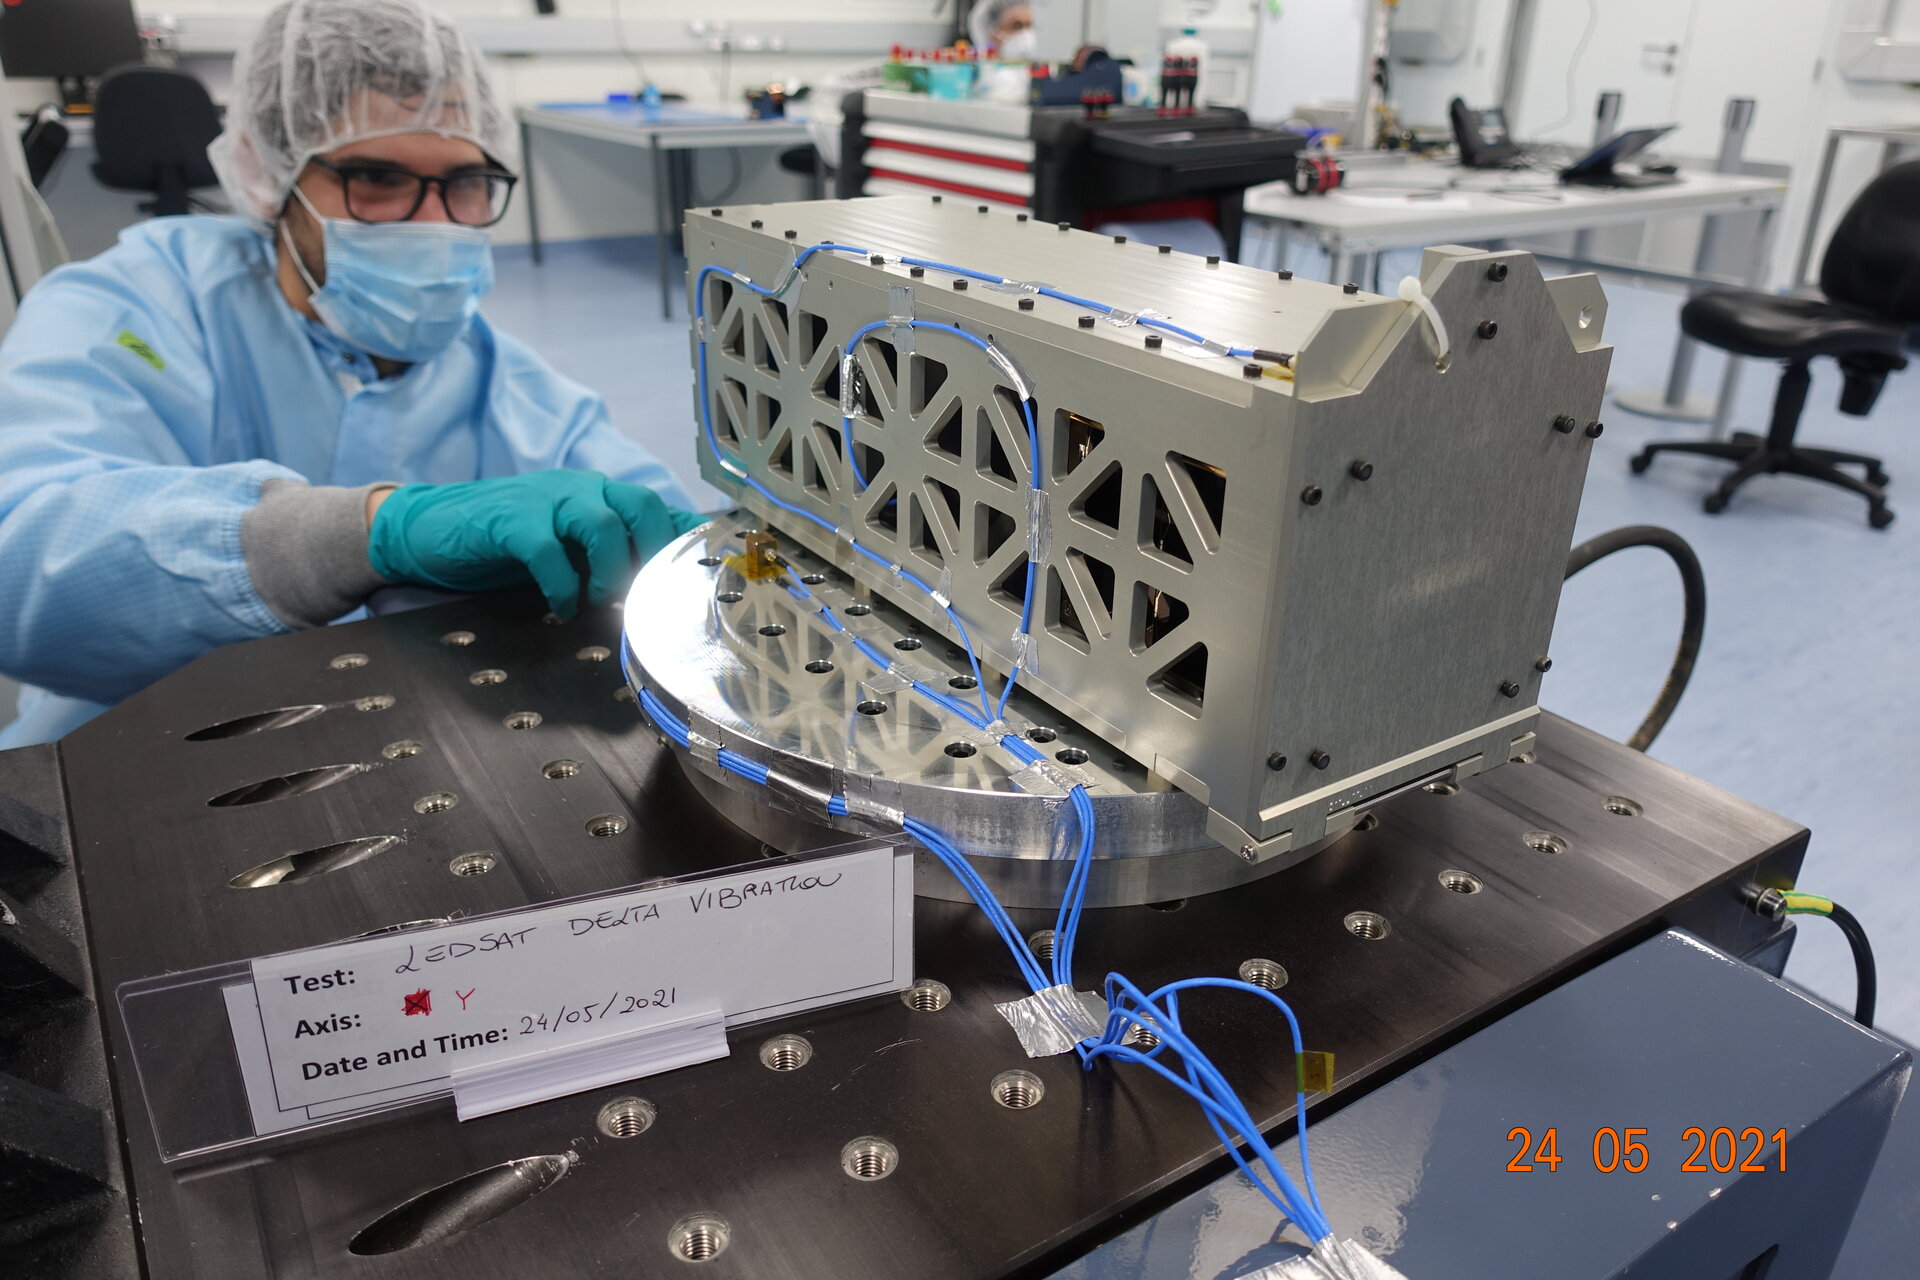 The integrated CubeSat and deployer is prepared on the shaker